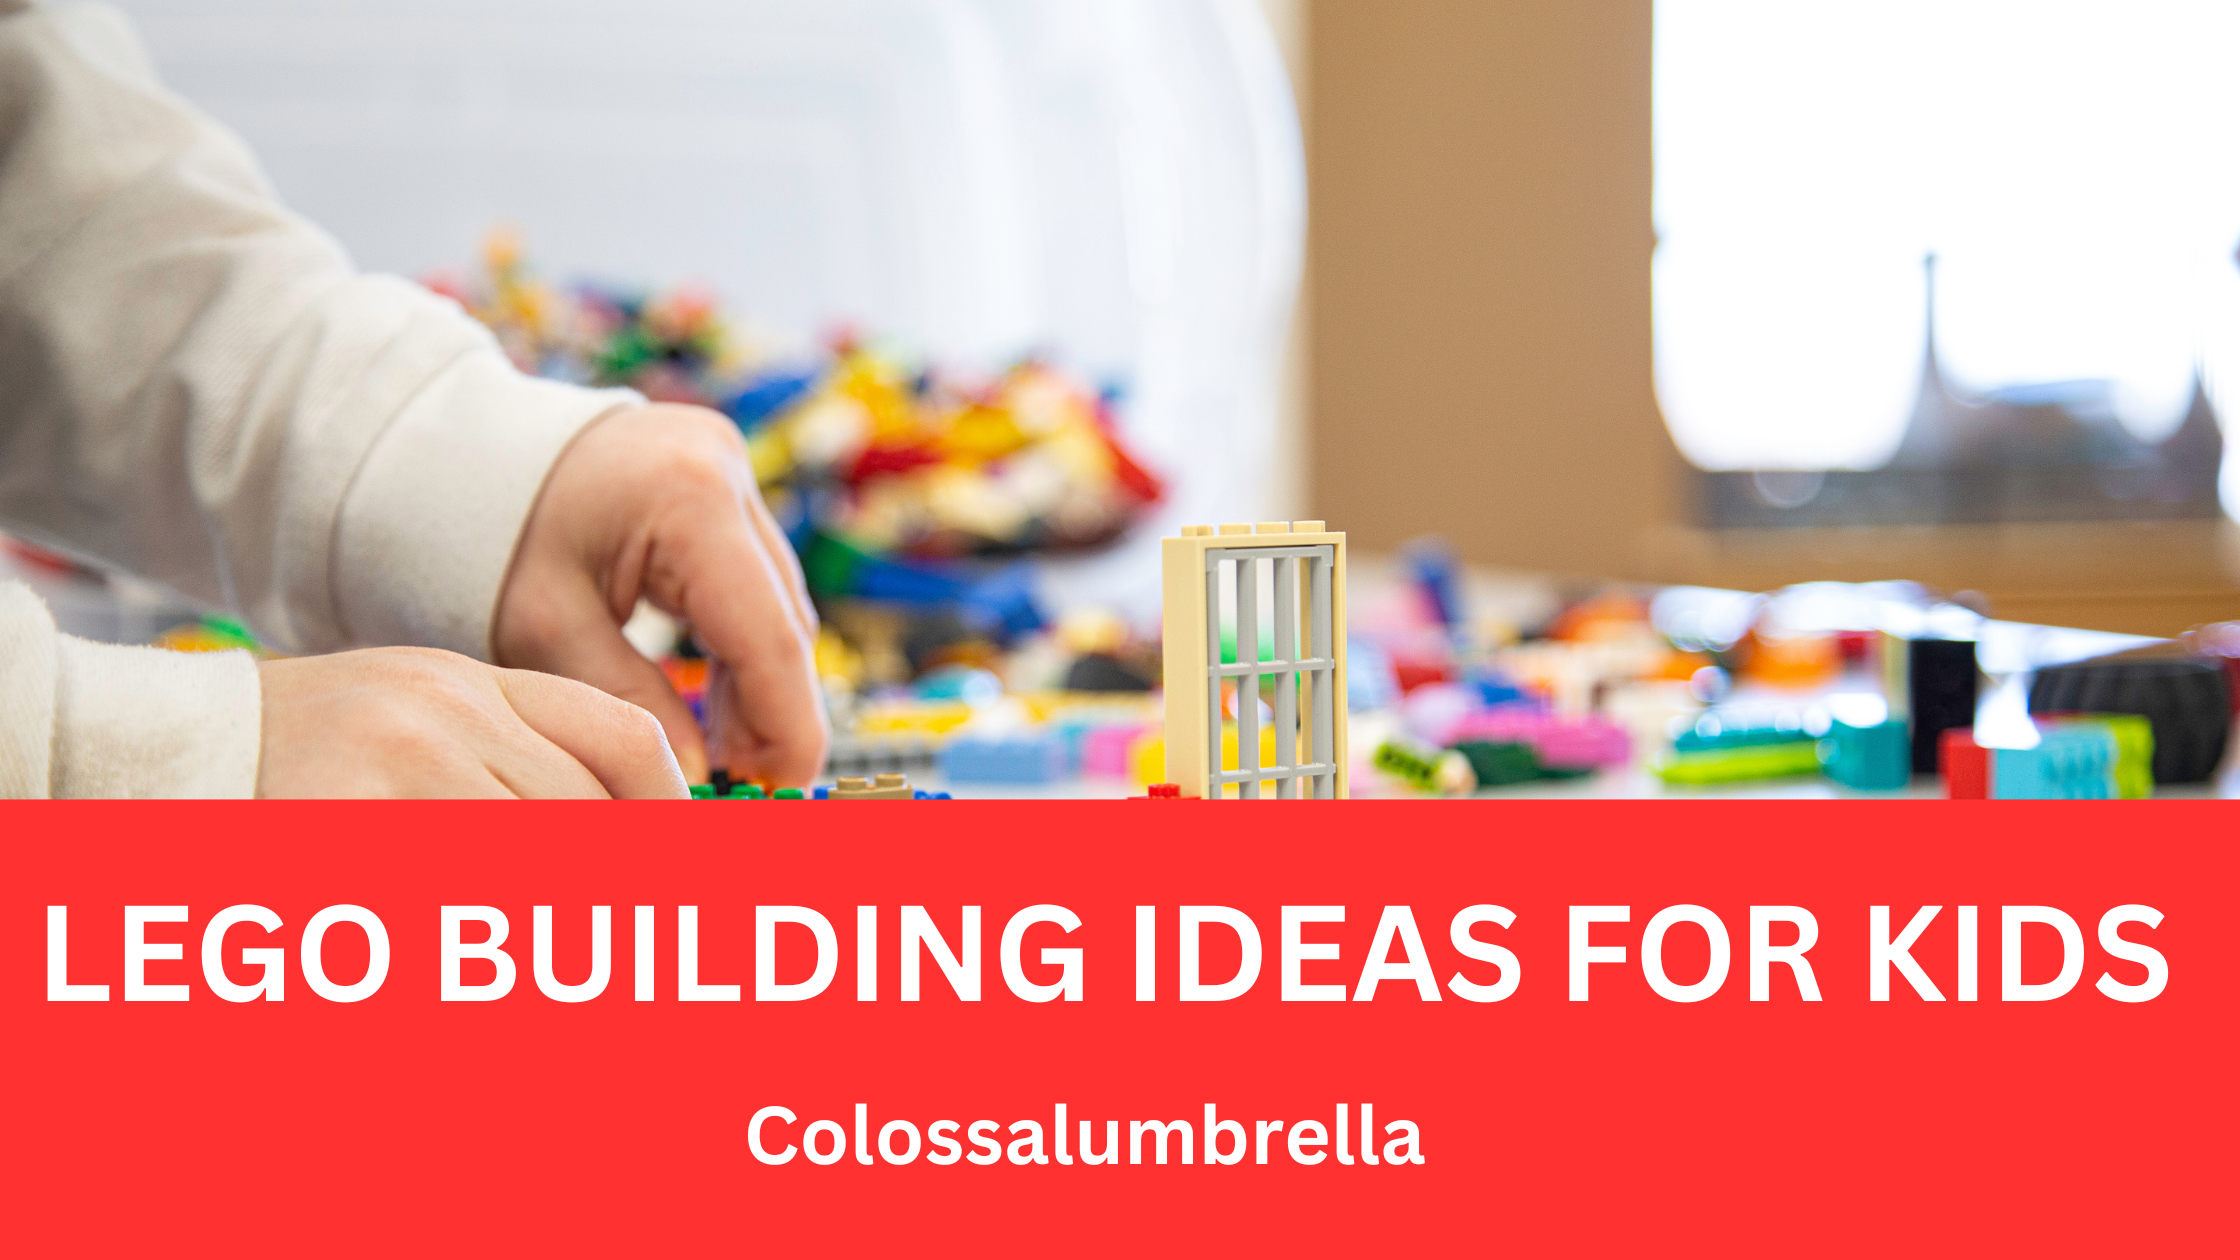 12 Lego Building Ideas for Kids